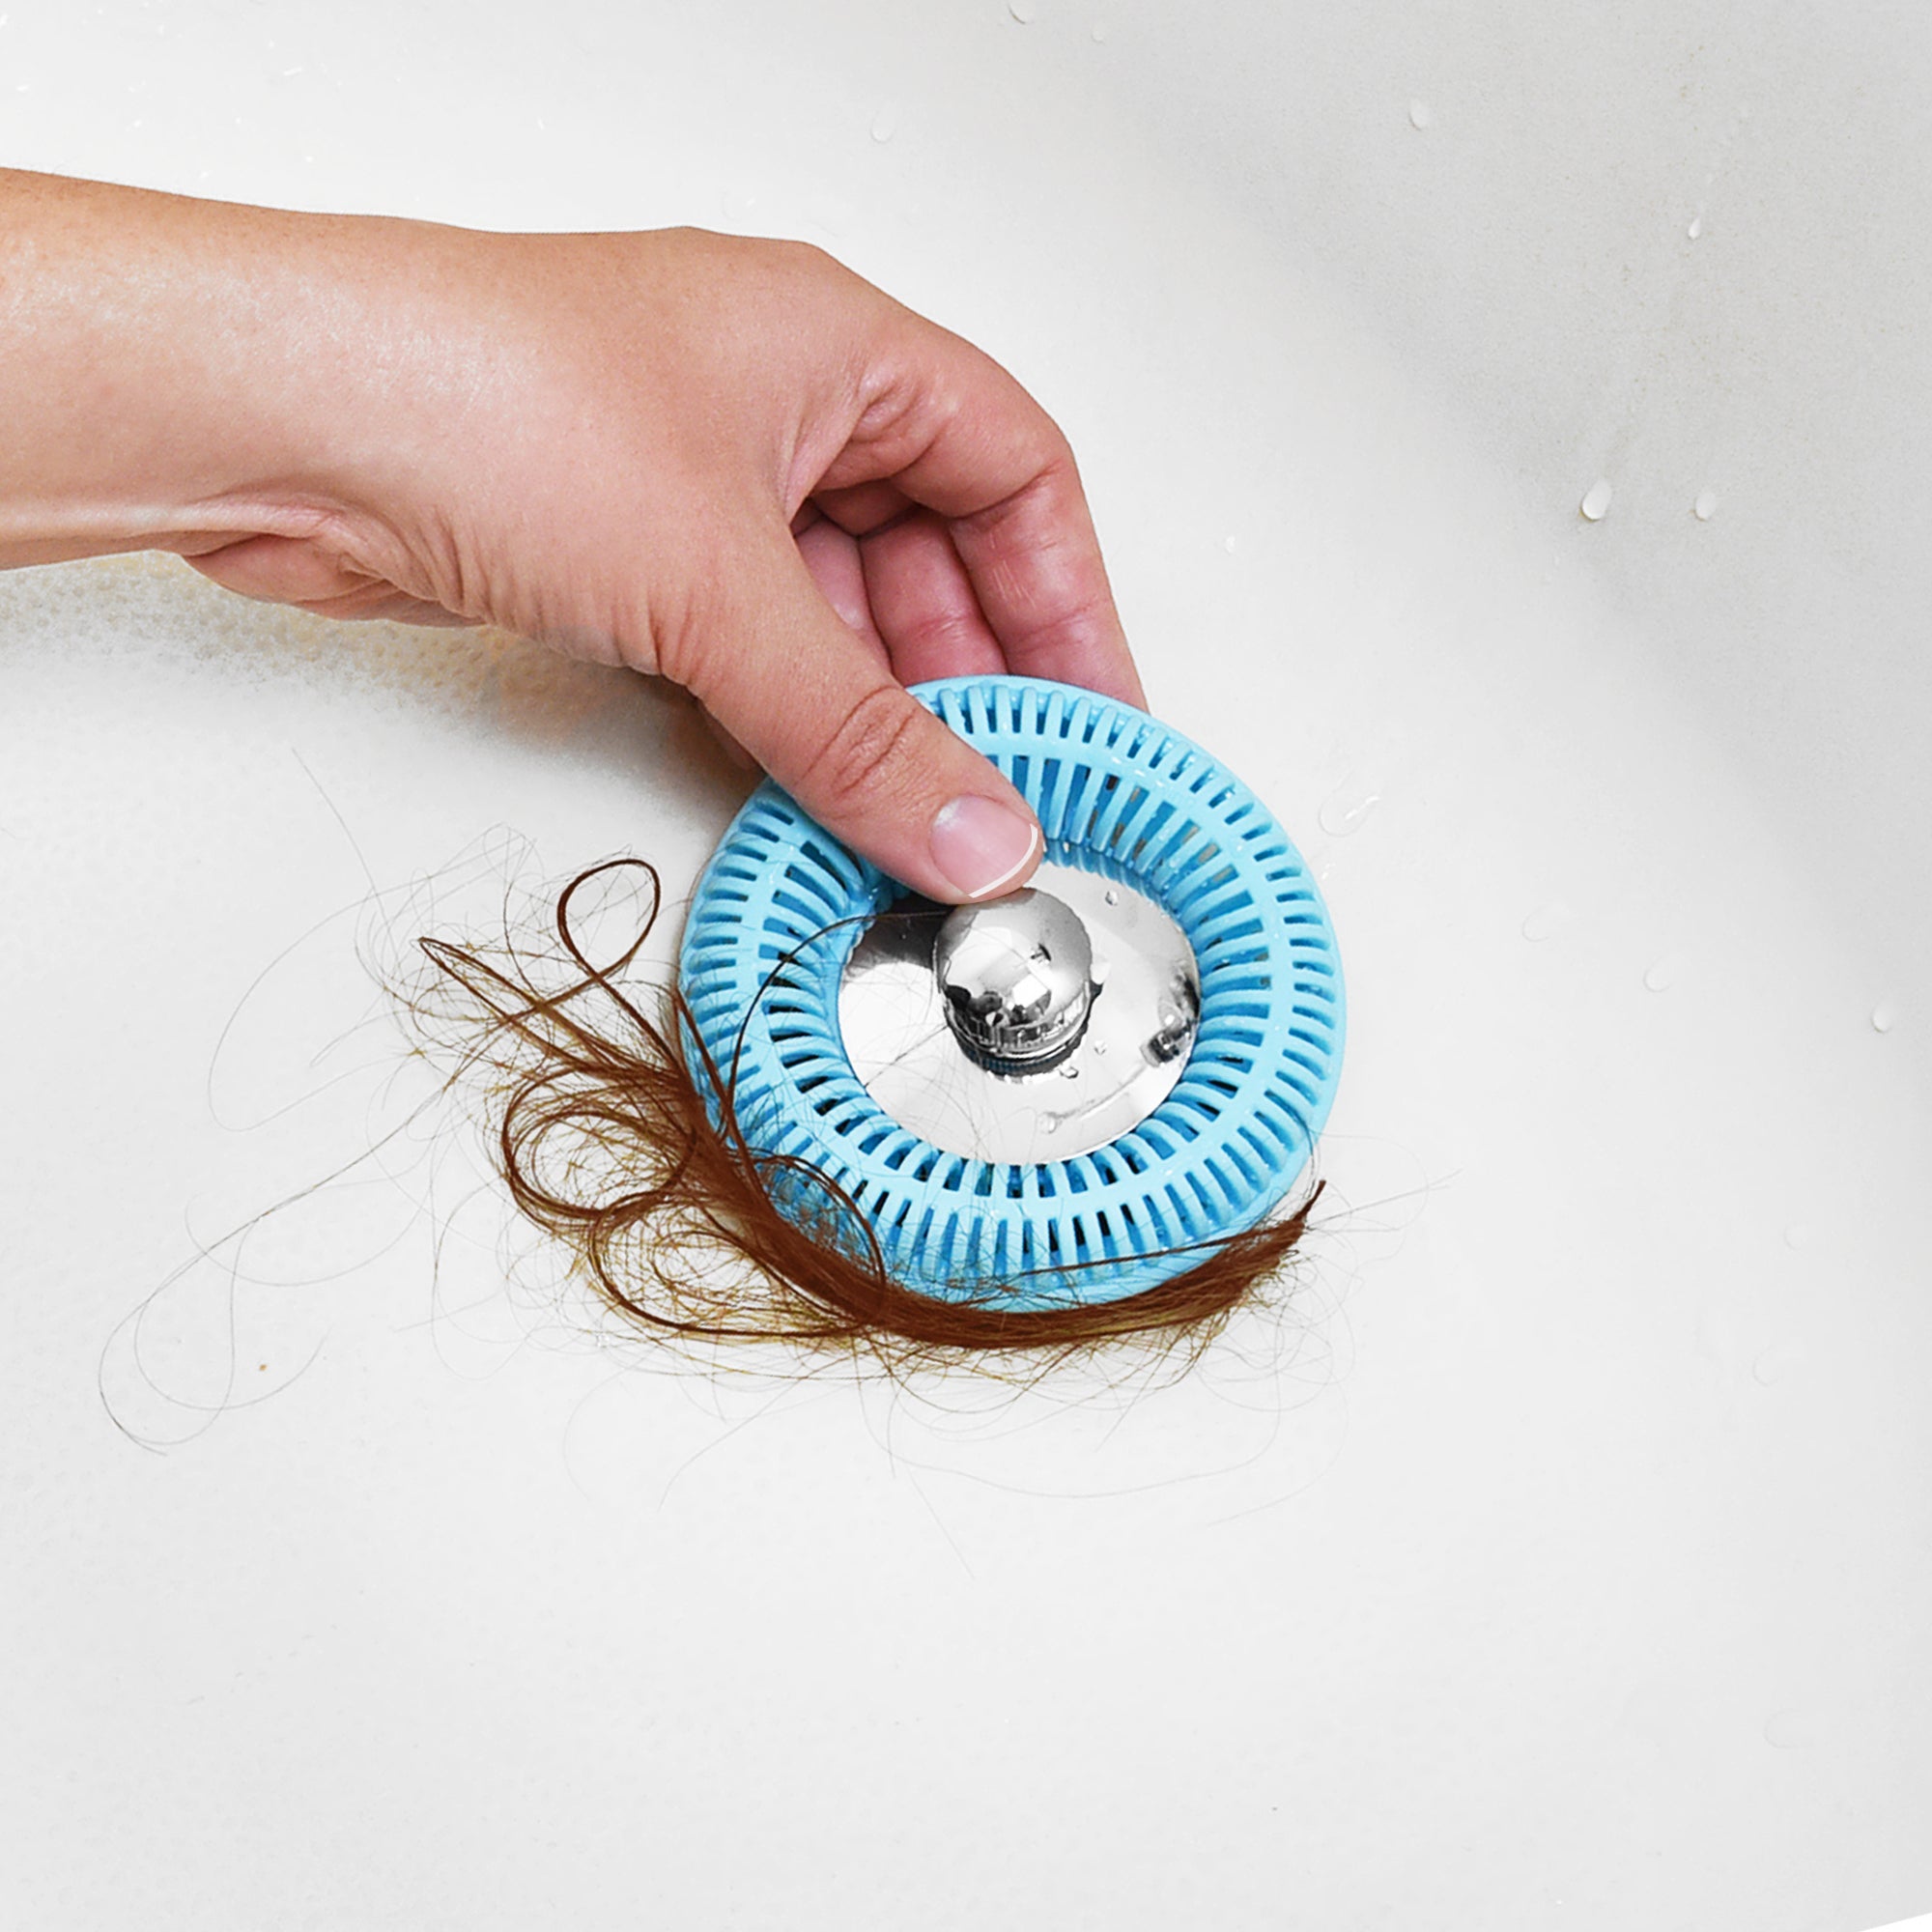 TUB RING TubRing The Ultimate Tub Drain Protector Hair Catcher